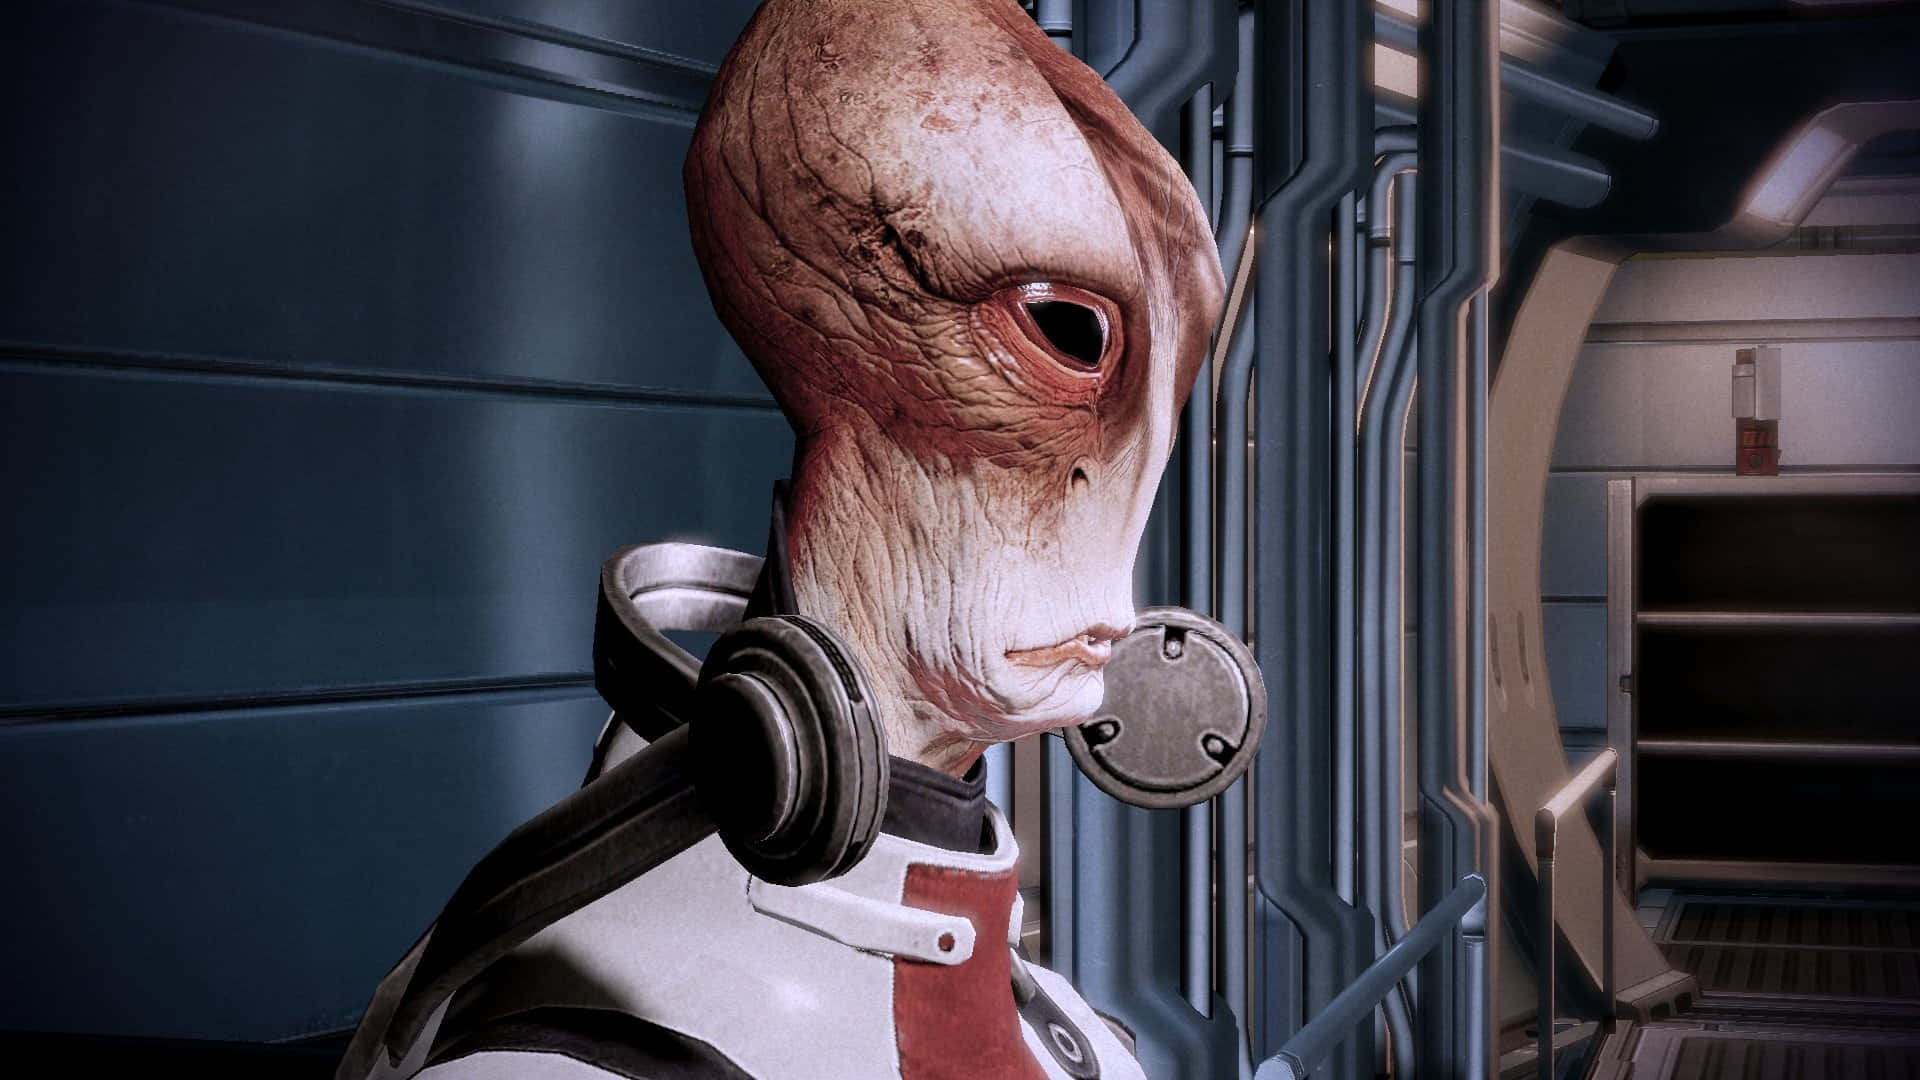 Mordin Solus, the brilliant Salarian scientist from Mass Effect, in a striking pose on the battlefield. Wallpaper